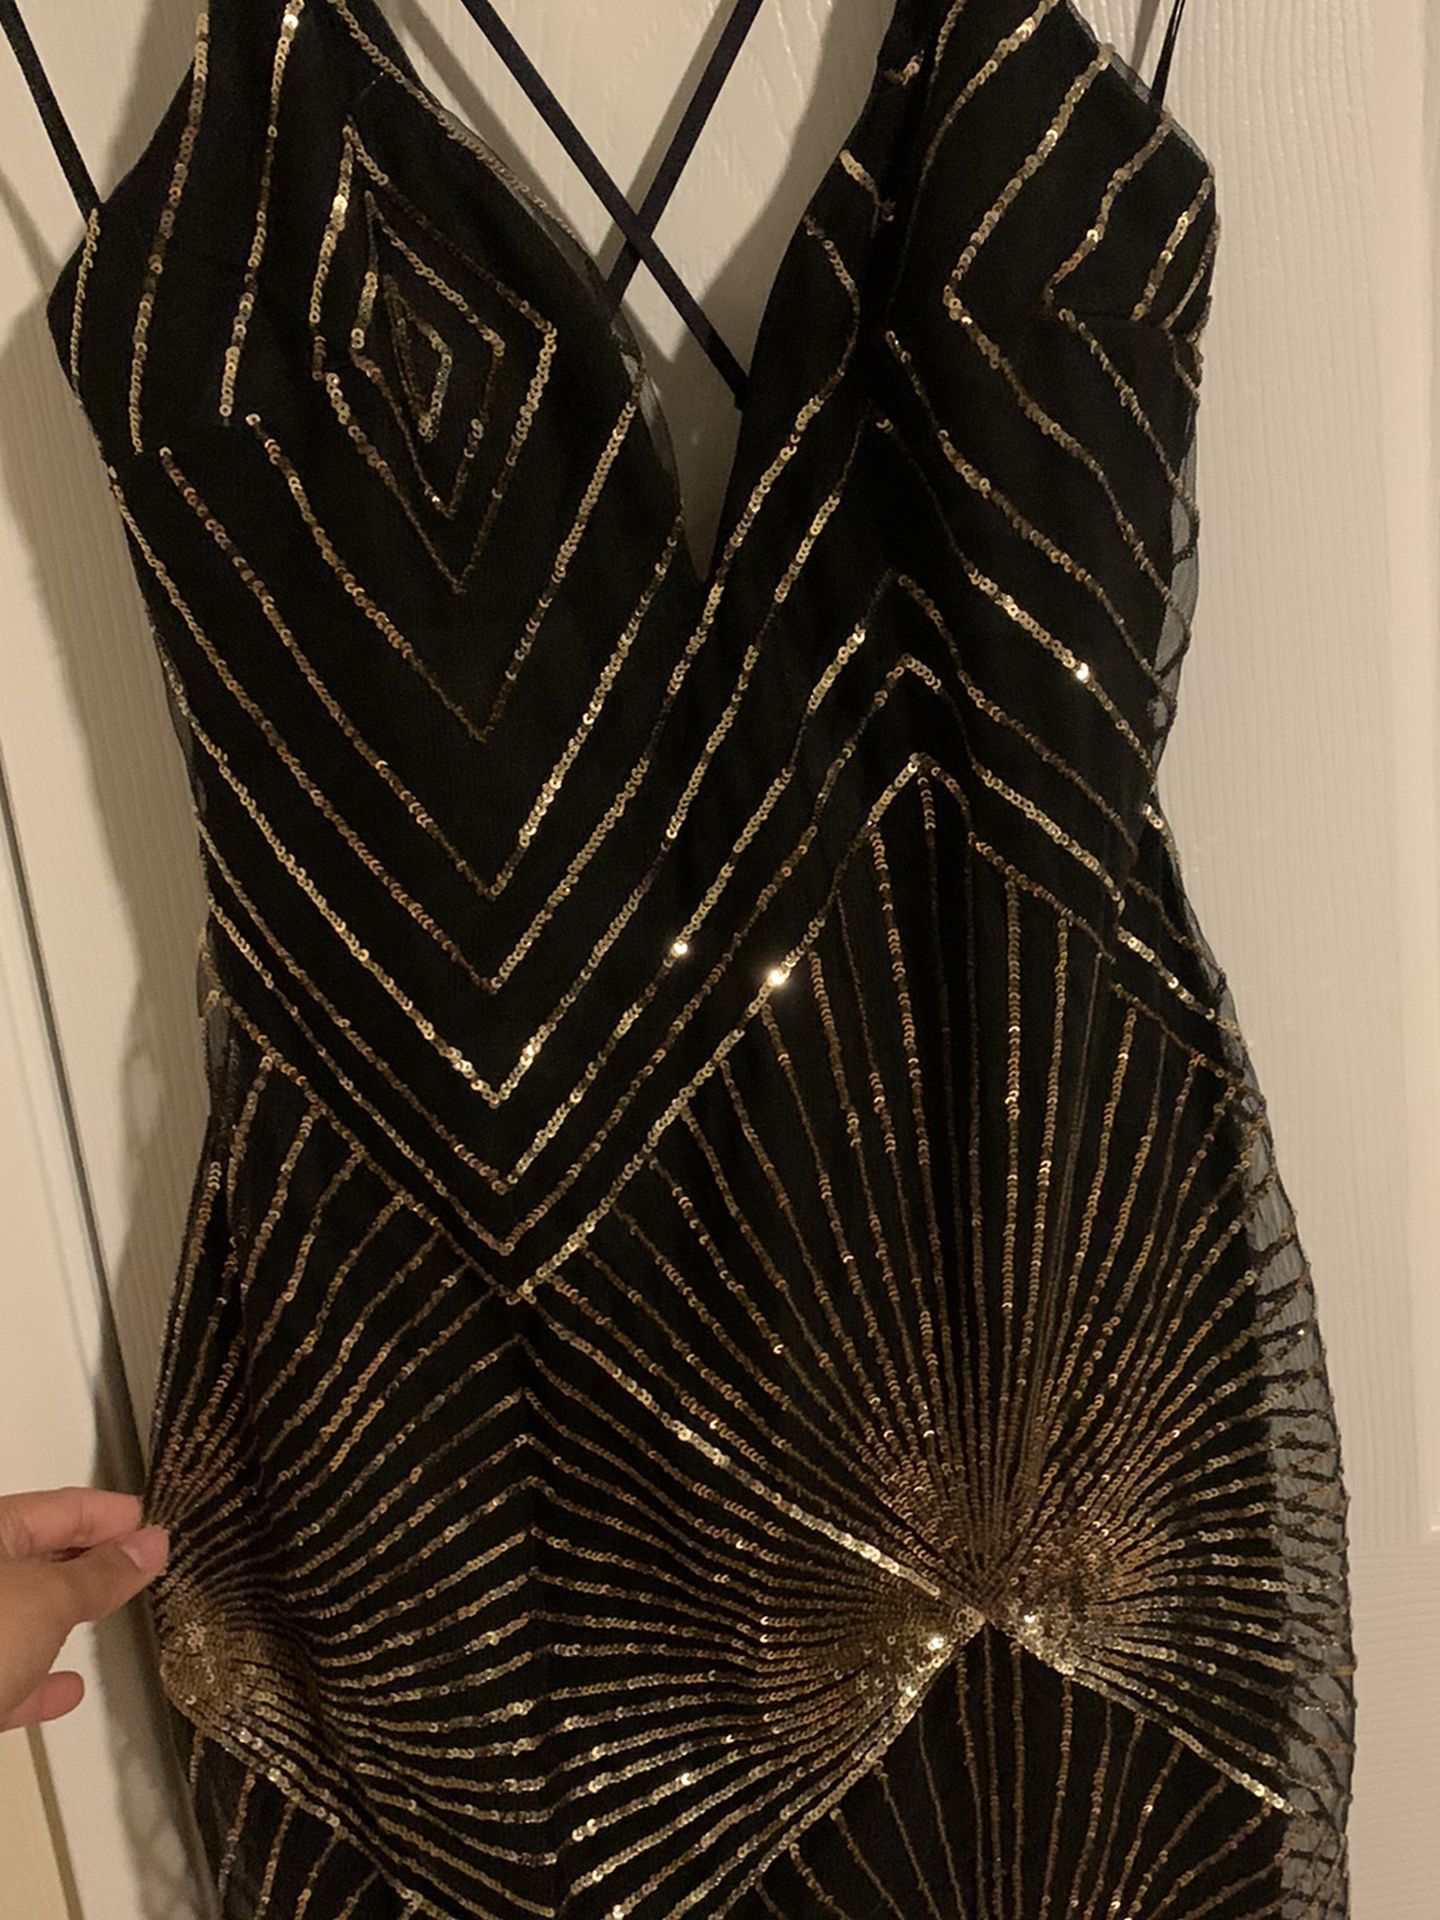 Black And Gold Sequin Dress